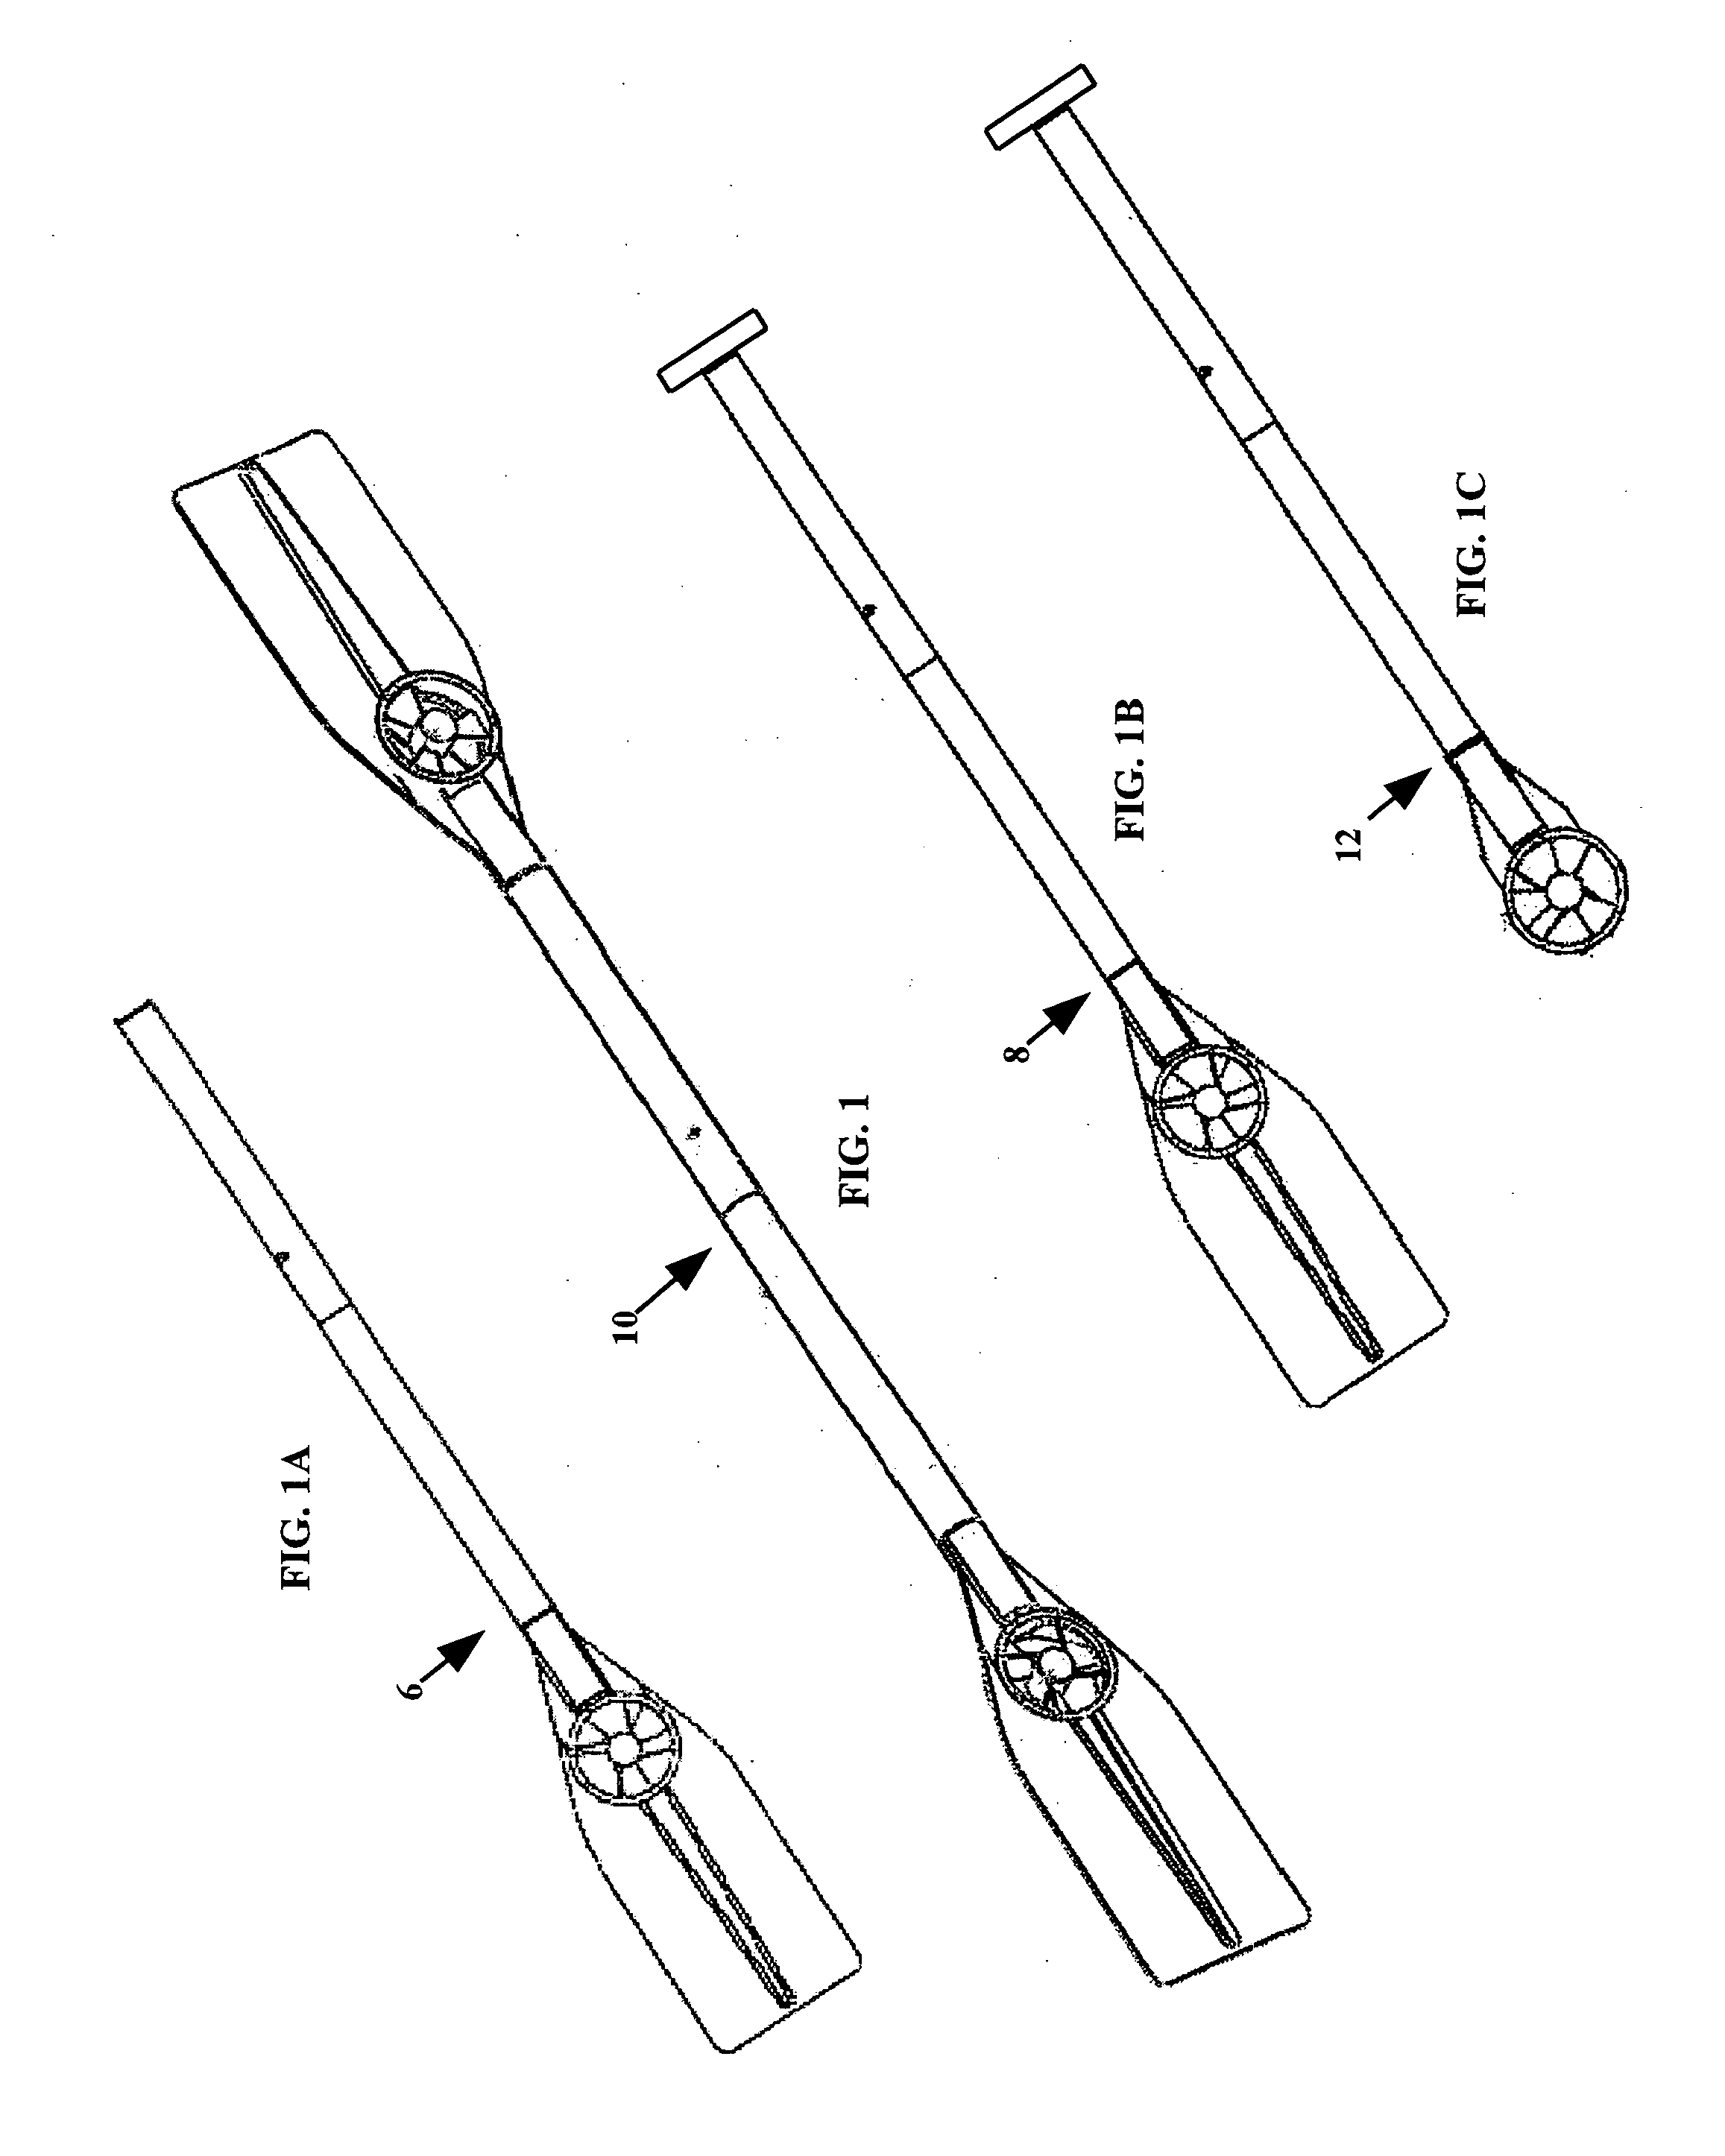 Combination hand-held multi-directional propulsion device and powered oar/paddle for rowboat, canoe, kayak, and the like